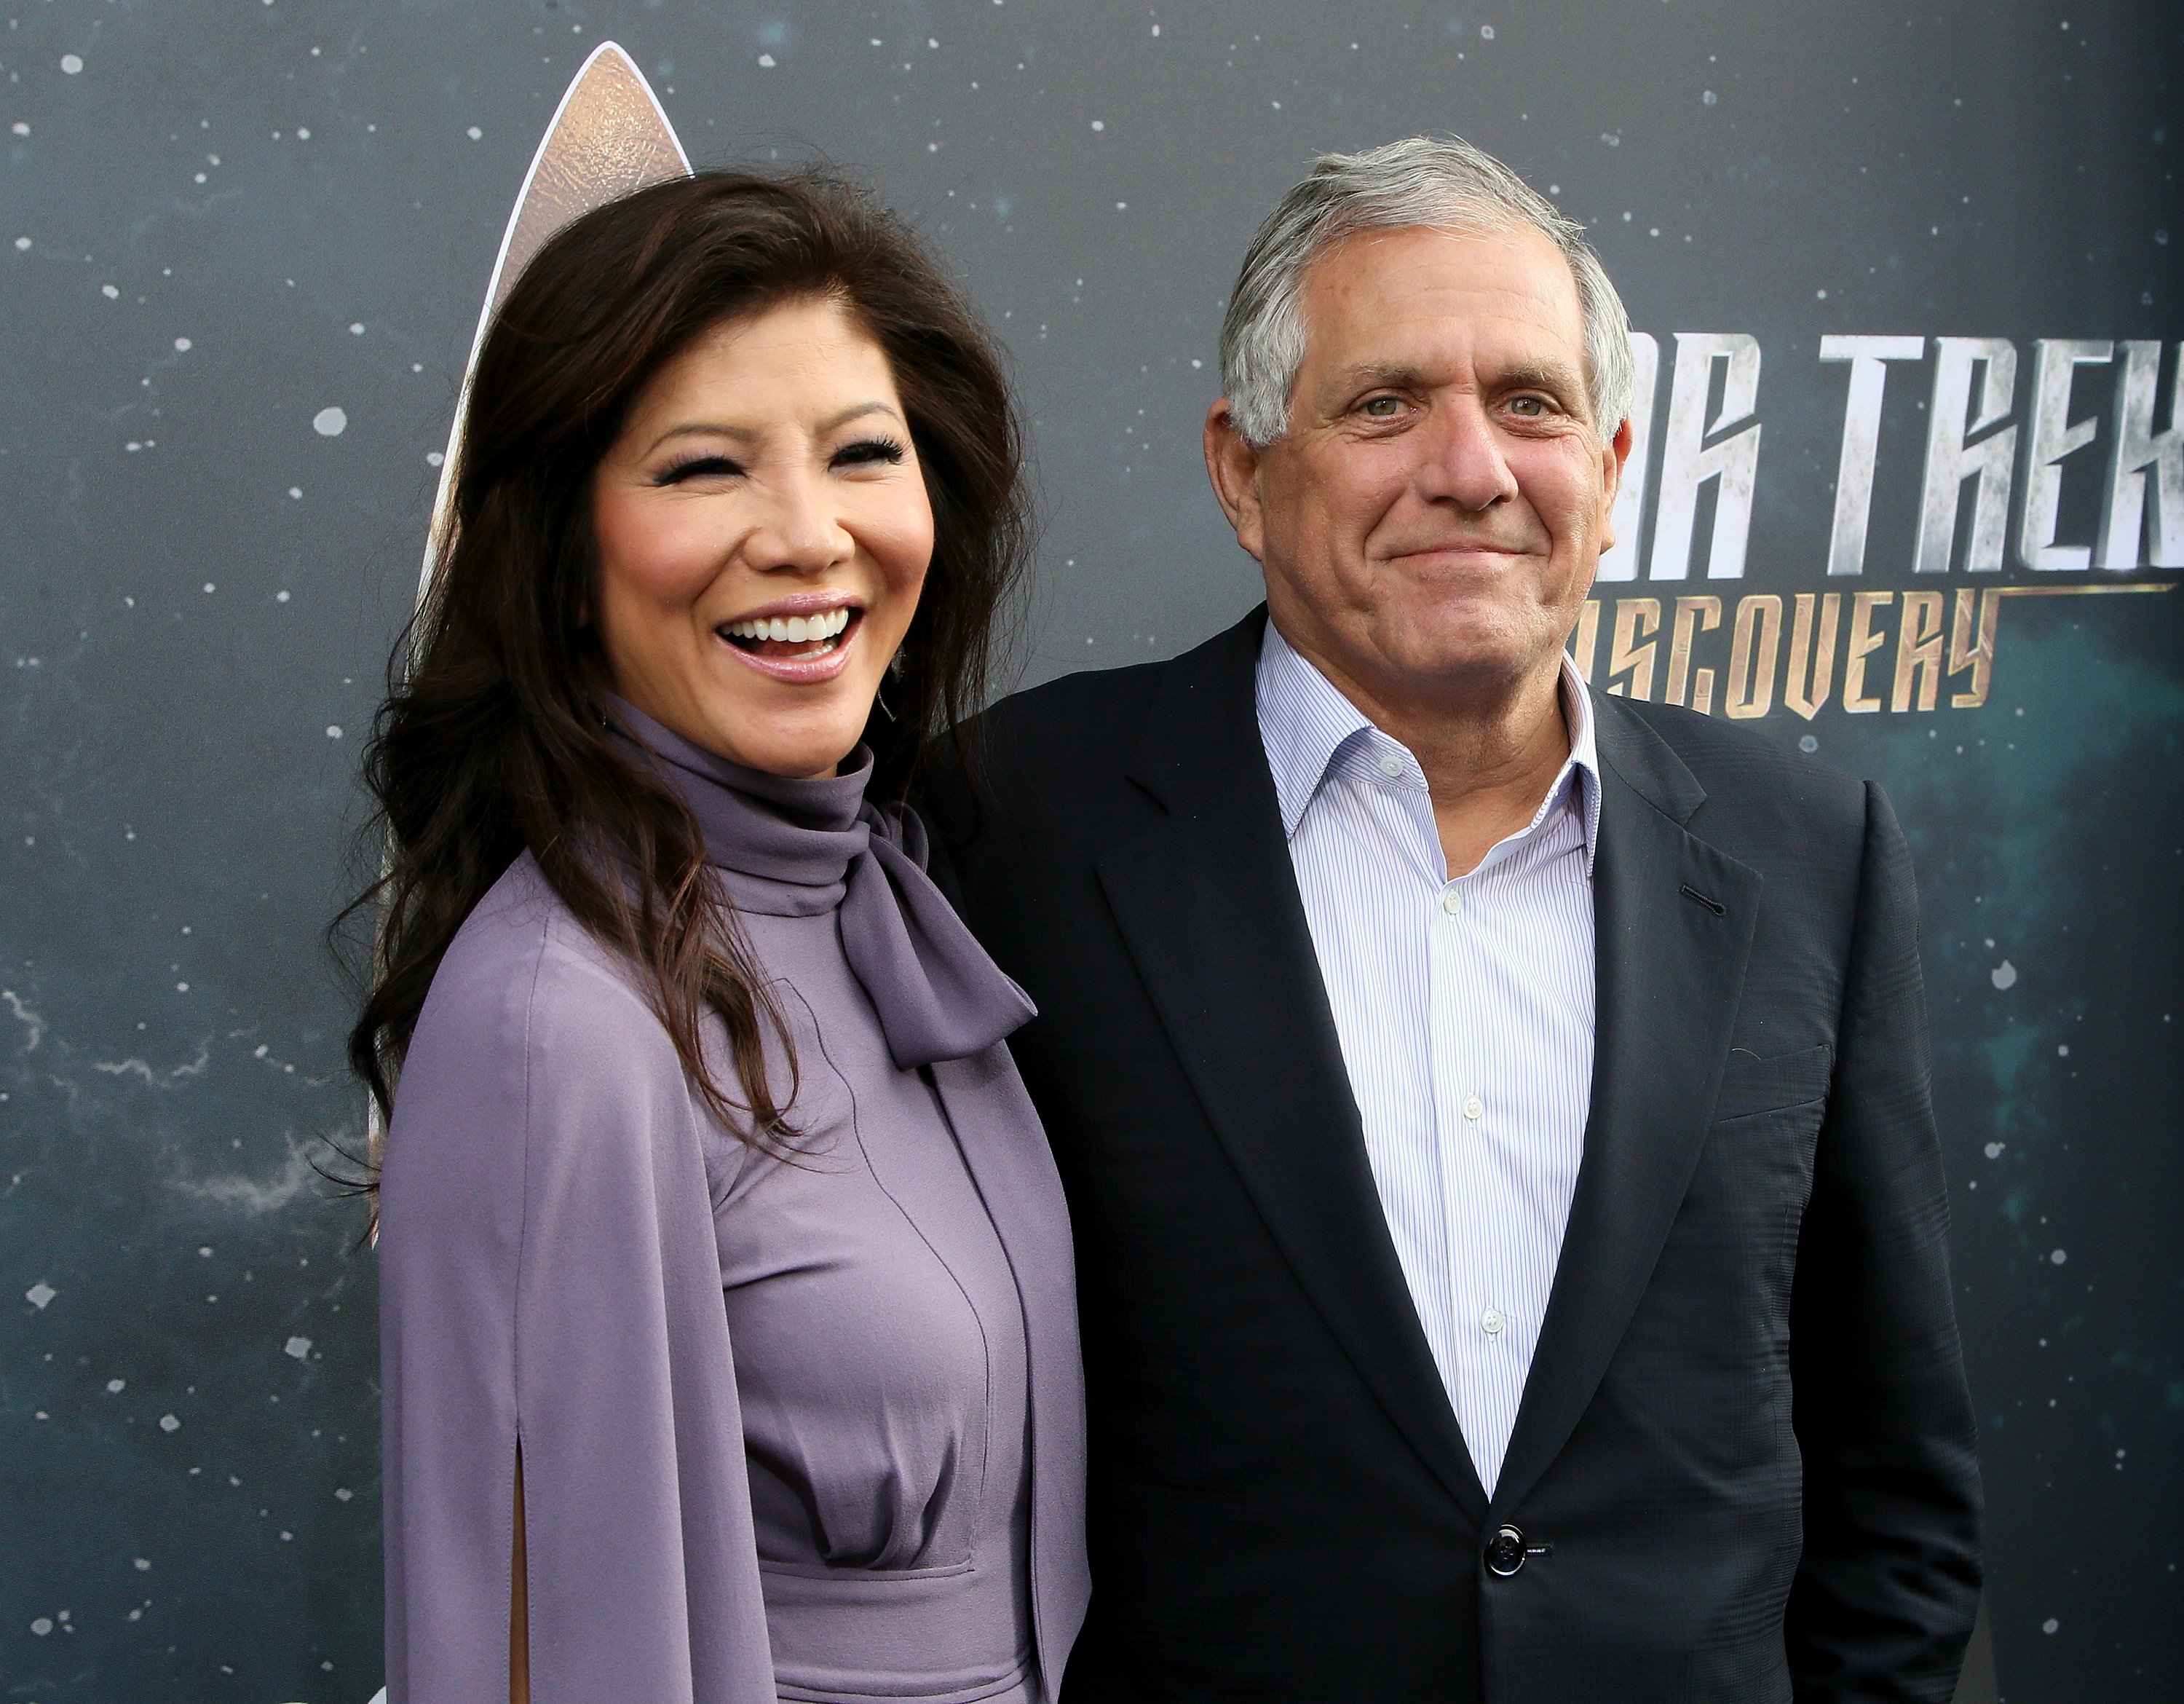 Julie Chen and Leslie Moonves attend the premiere of CBS's "Star Trek: Discovery" on September 19, 2017, in Los Angeles, California | Source: Getty Images